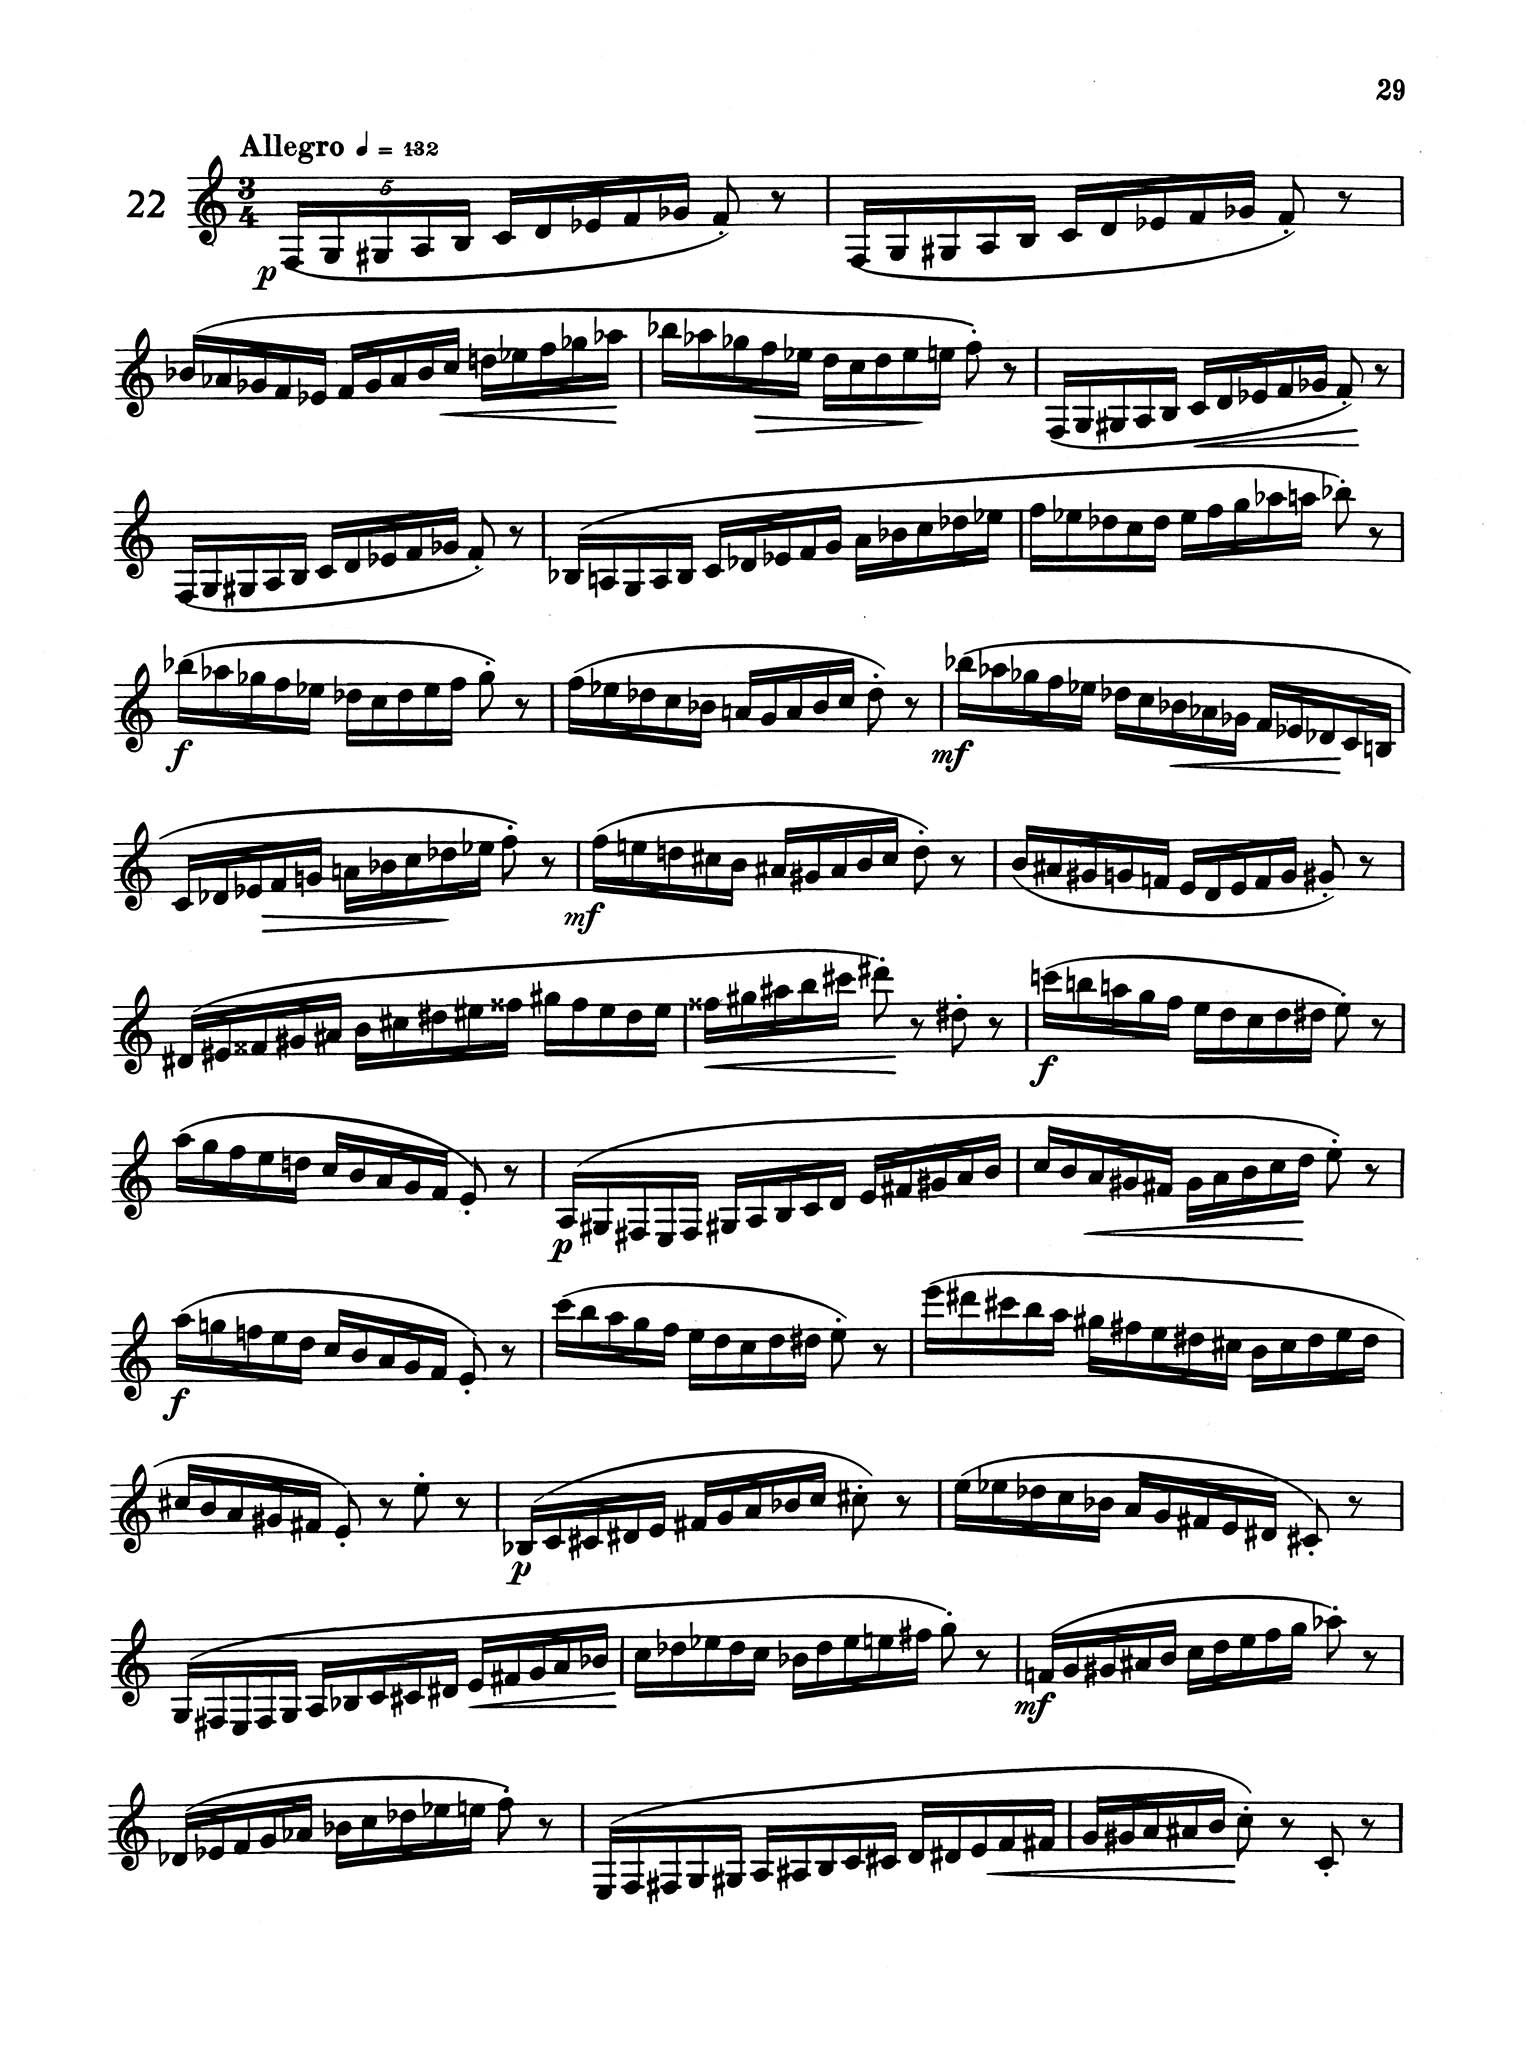 48 Studies for Clarinet: Book 1 of 2 Page 29